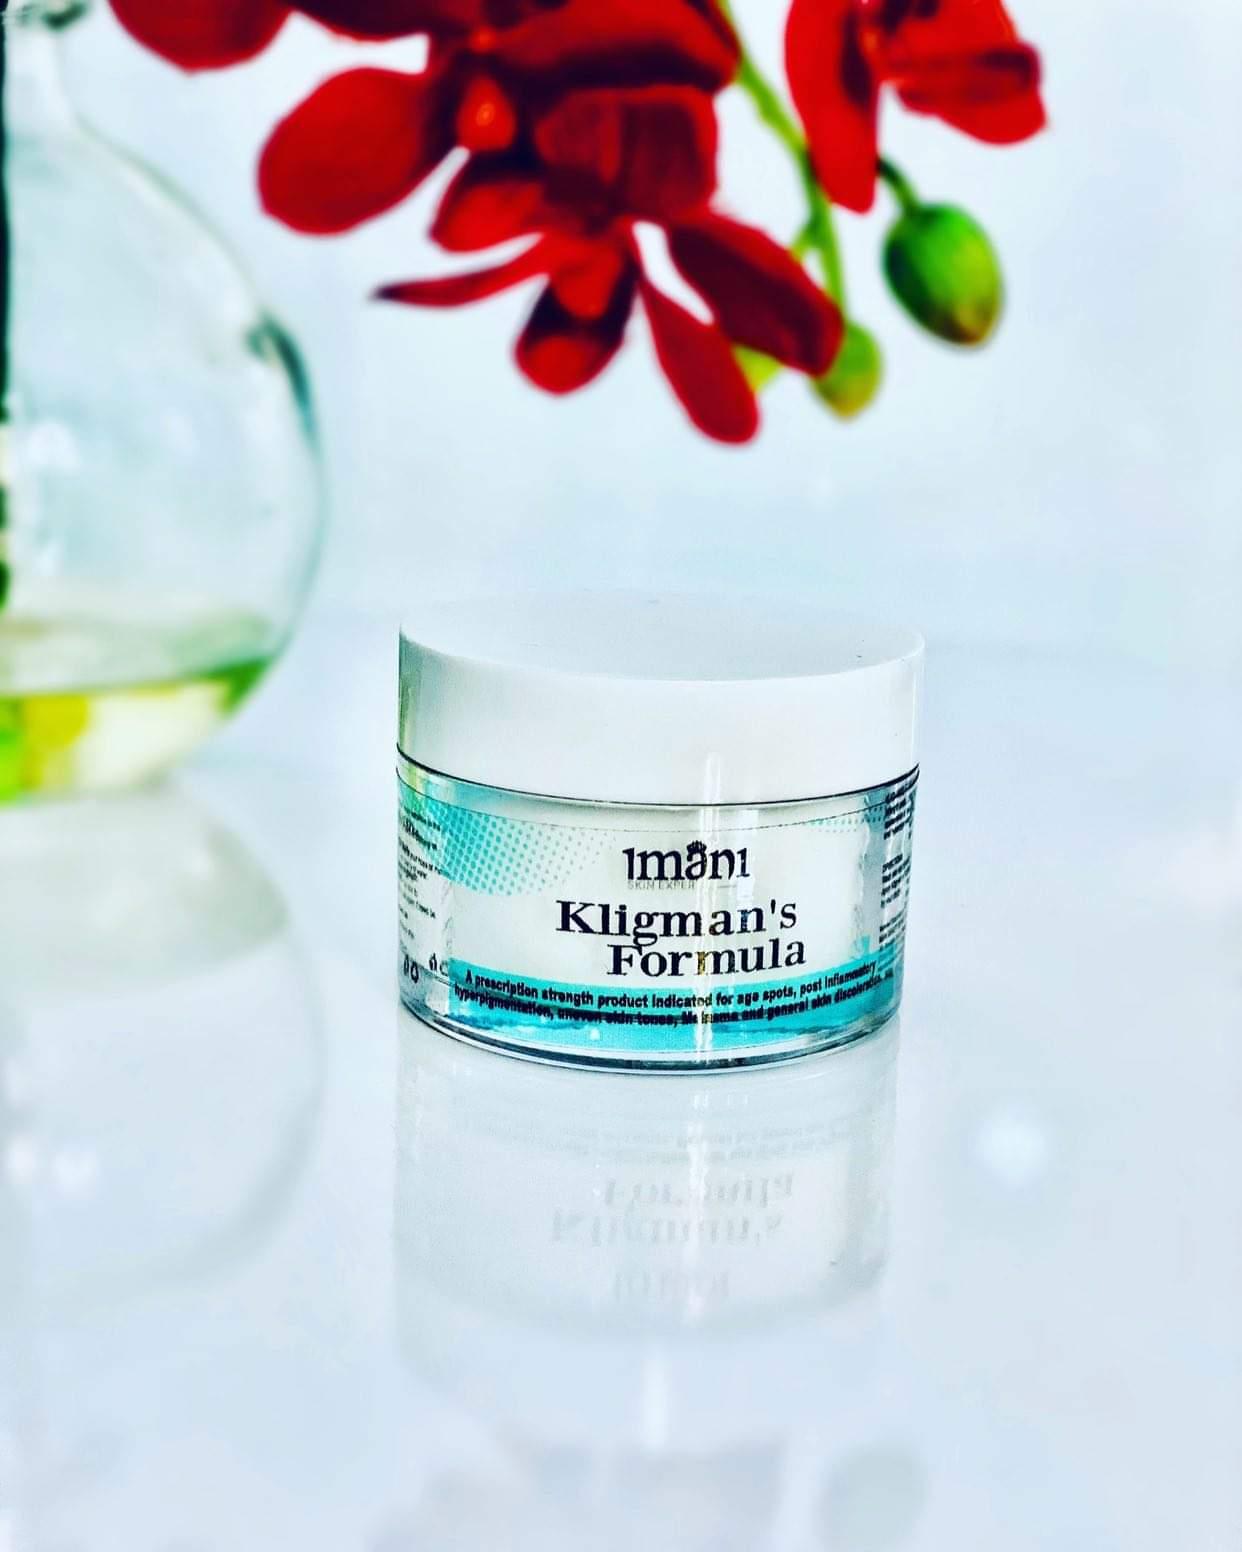 Buy Kligmans Formula Online. Enjoy safe shopping online with our ecommerce. ✓ Best Price in Nigeria ✓ Fast Delivery & Express delivery Available. Also available at the Lagos and Abuja offices of Imani Aesthetic and Laser Clinic